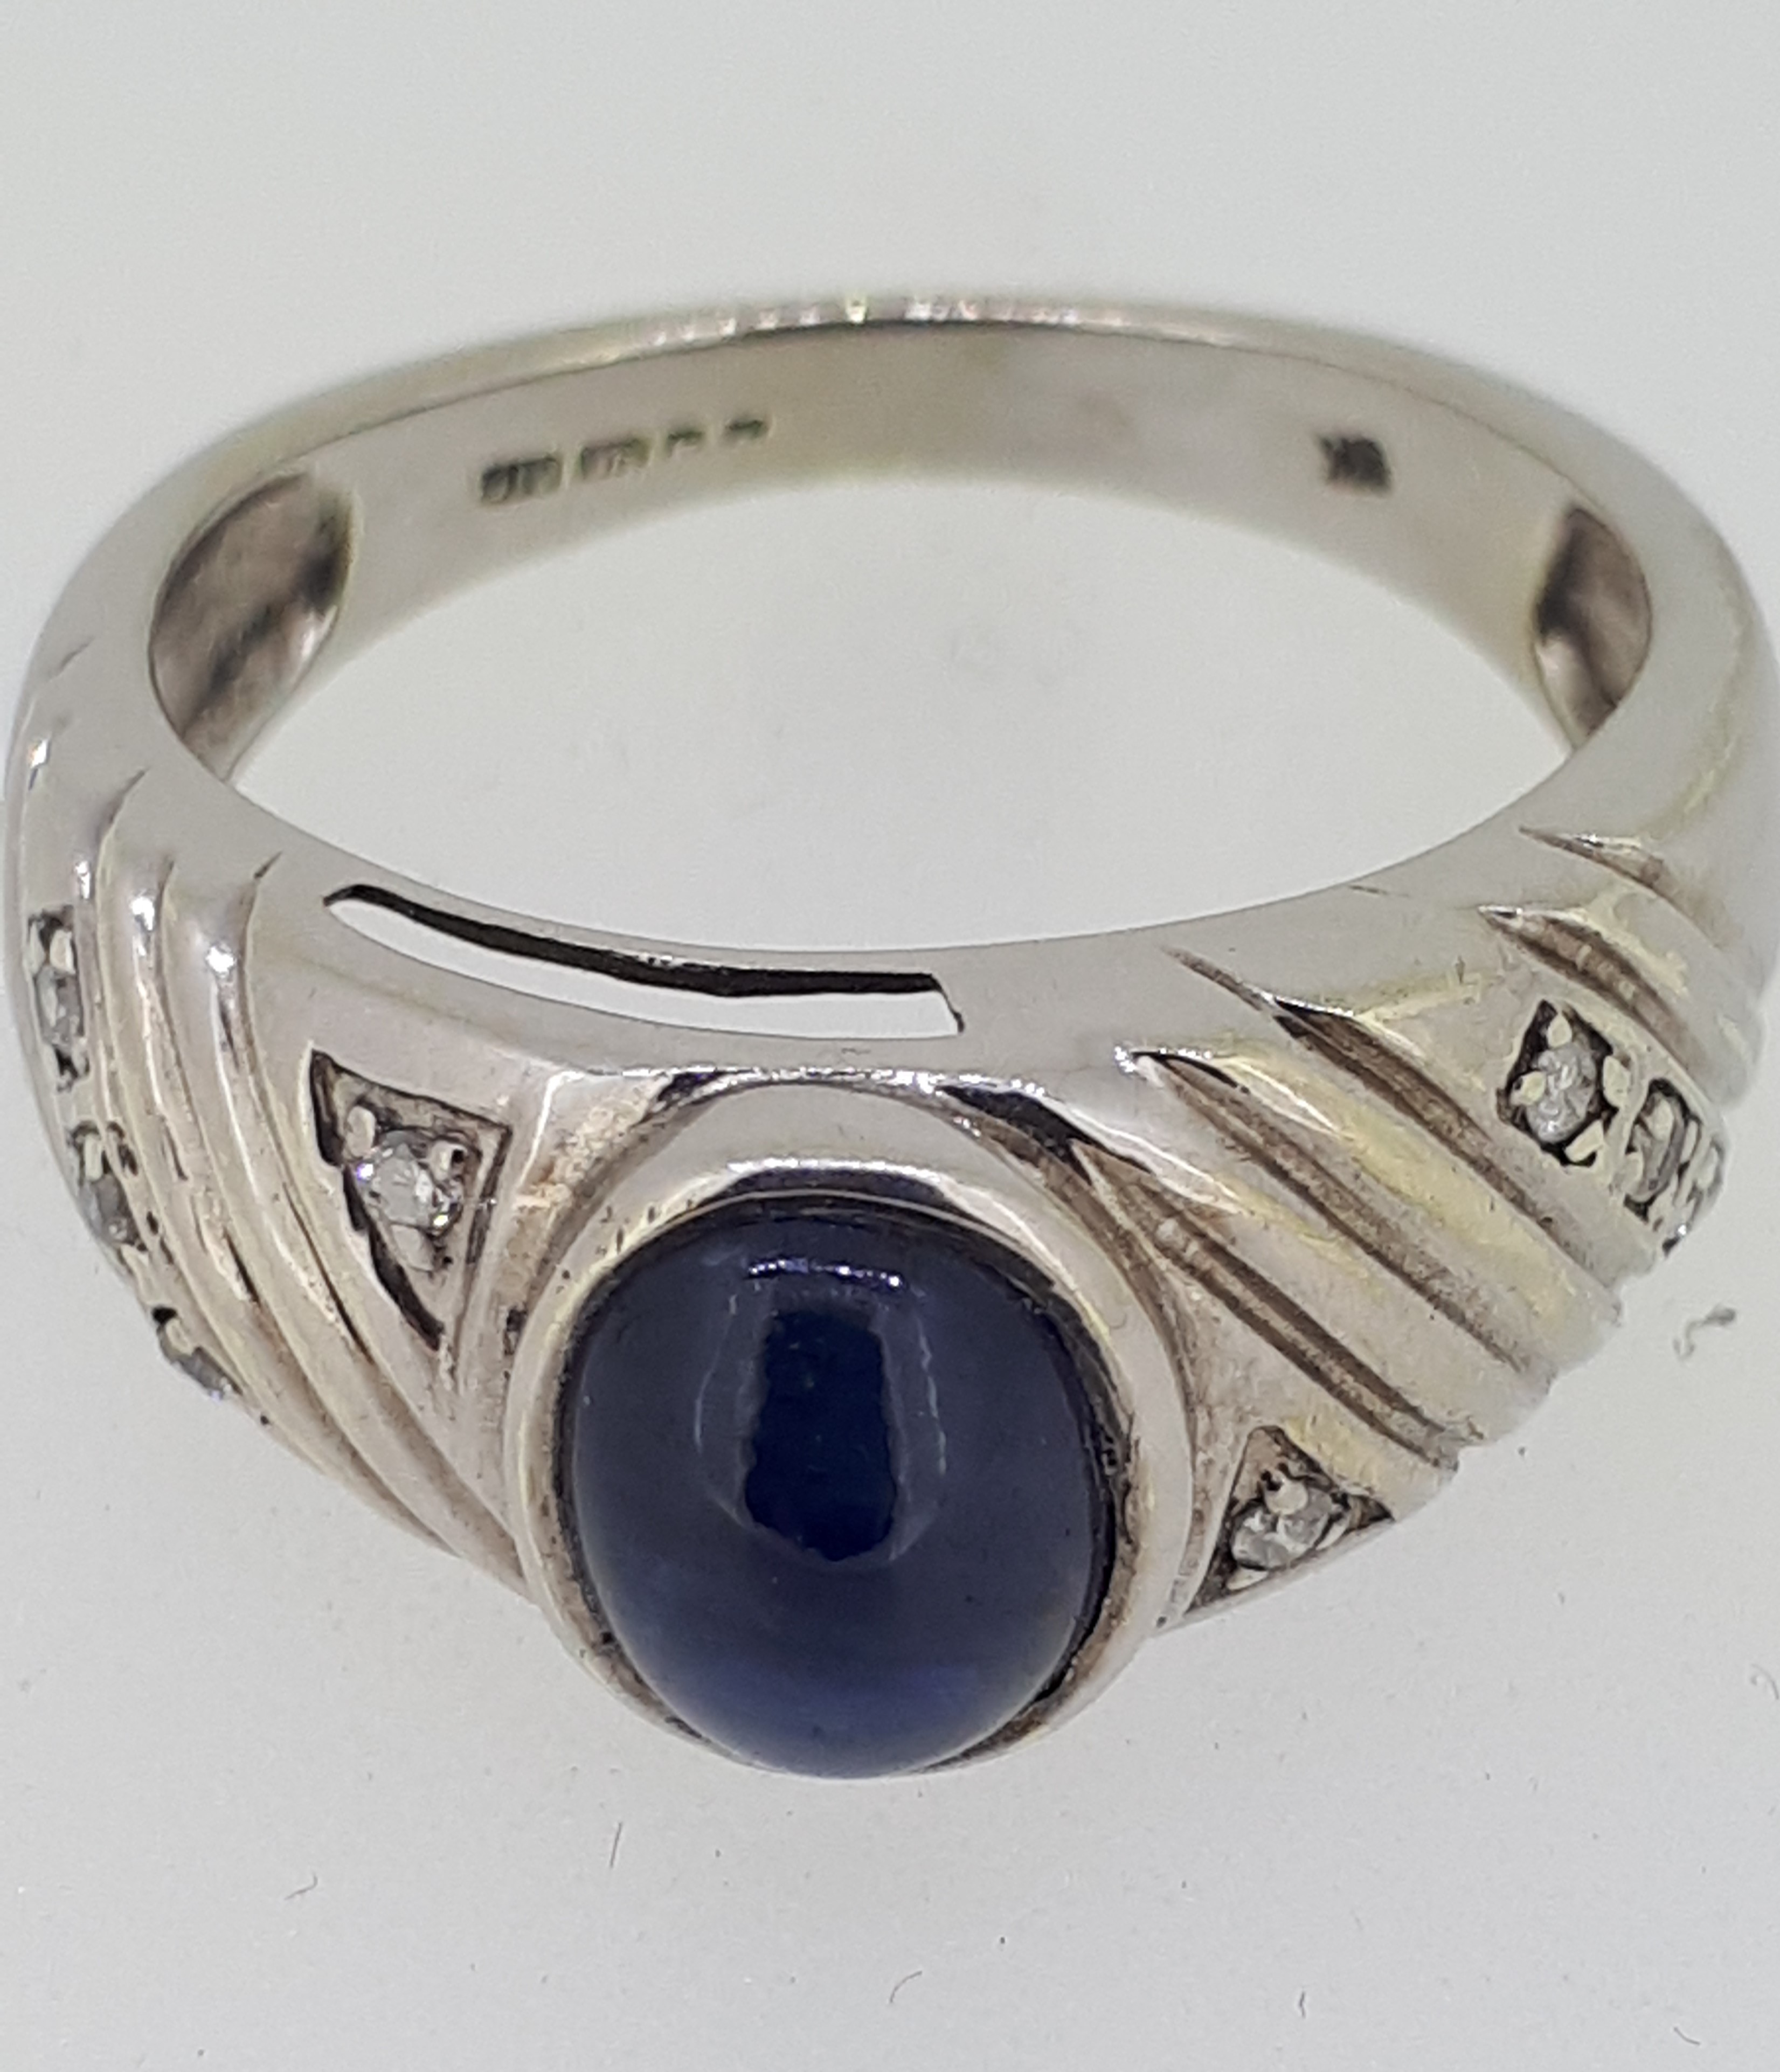 9ct (375) White Gold Oval Sapphire and Diamond Ring - Image 4 of 7